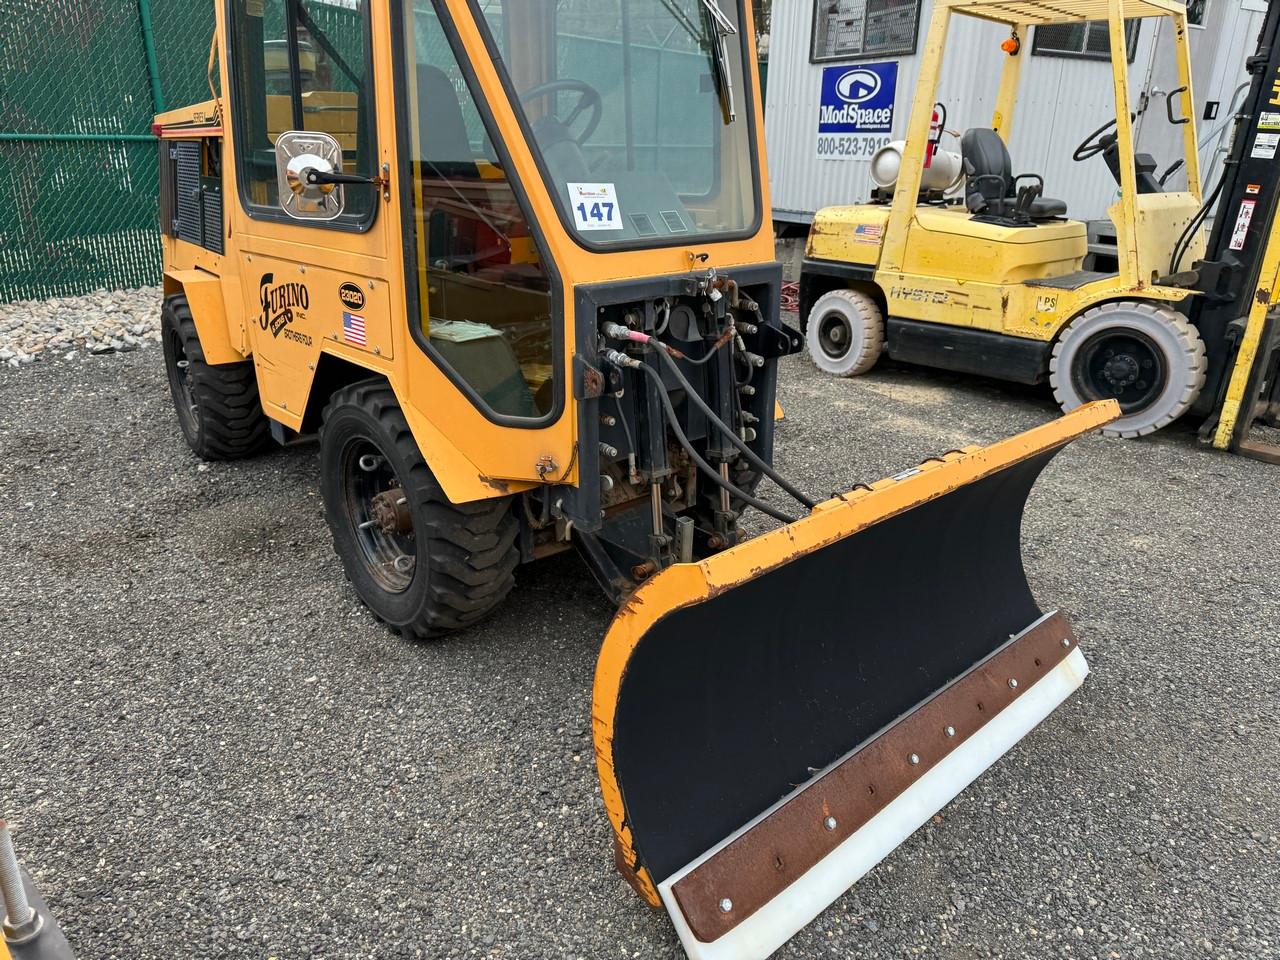 Trackless Vehicles Limited MT5TD w/ Snow Plow, Snow Blower and Sweeper Attatchments